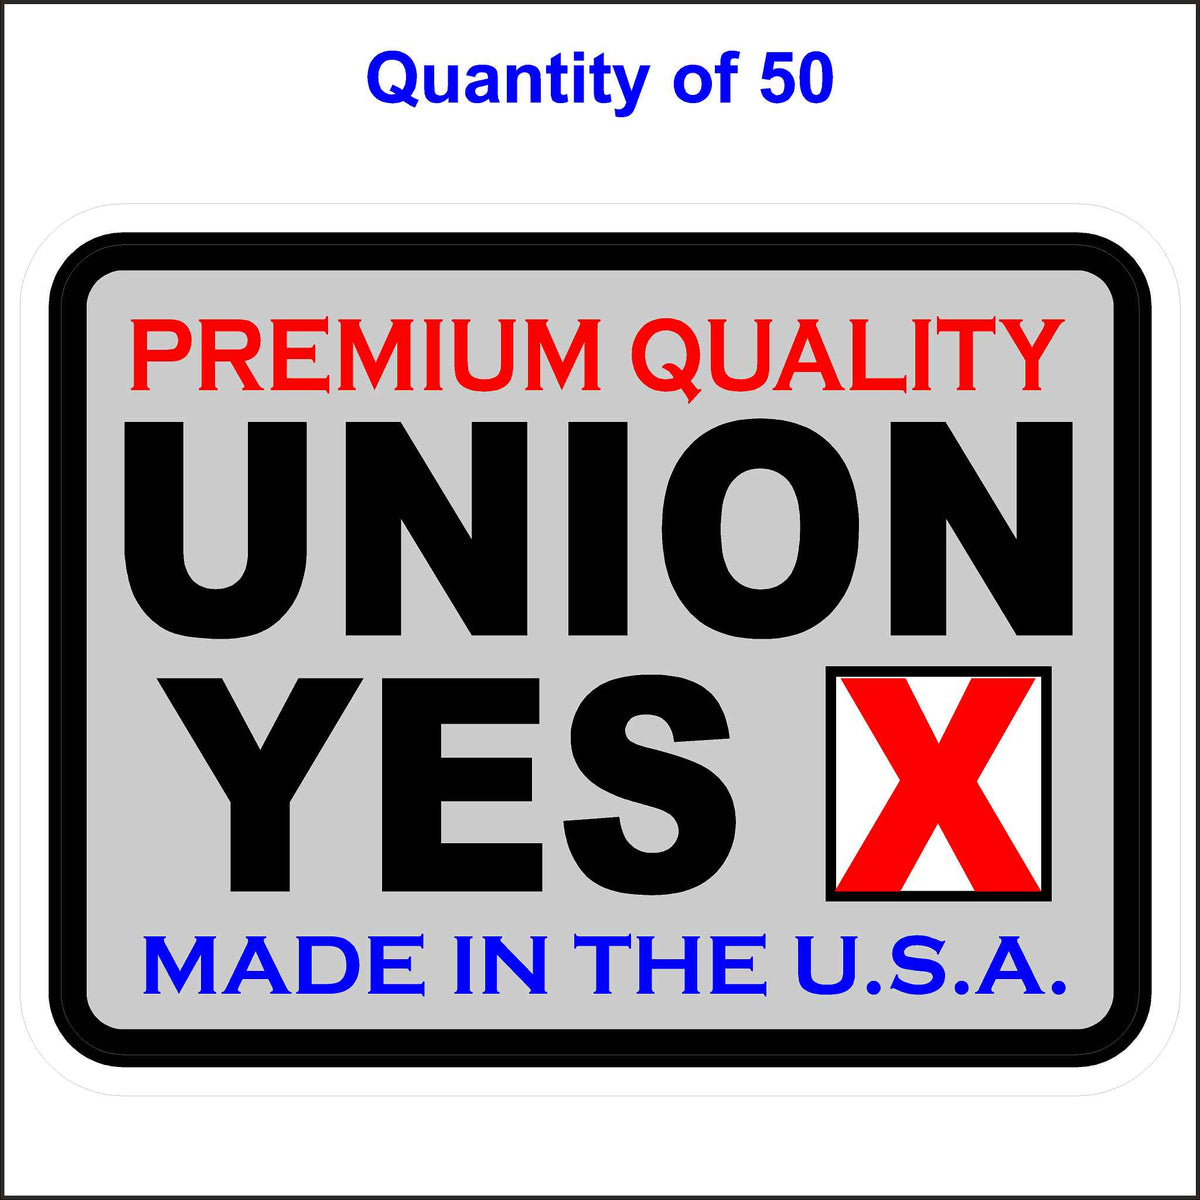 Union Stickers Made in the USA Premium Quality Union Yes. 50 Quantity.